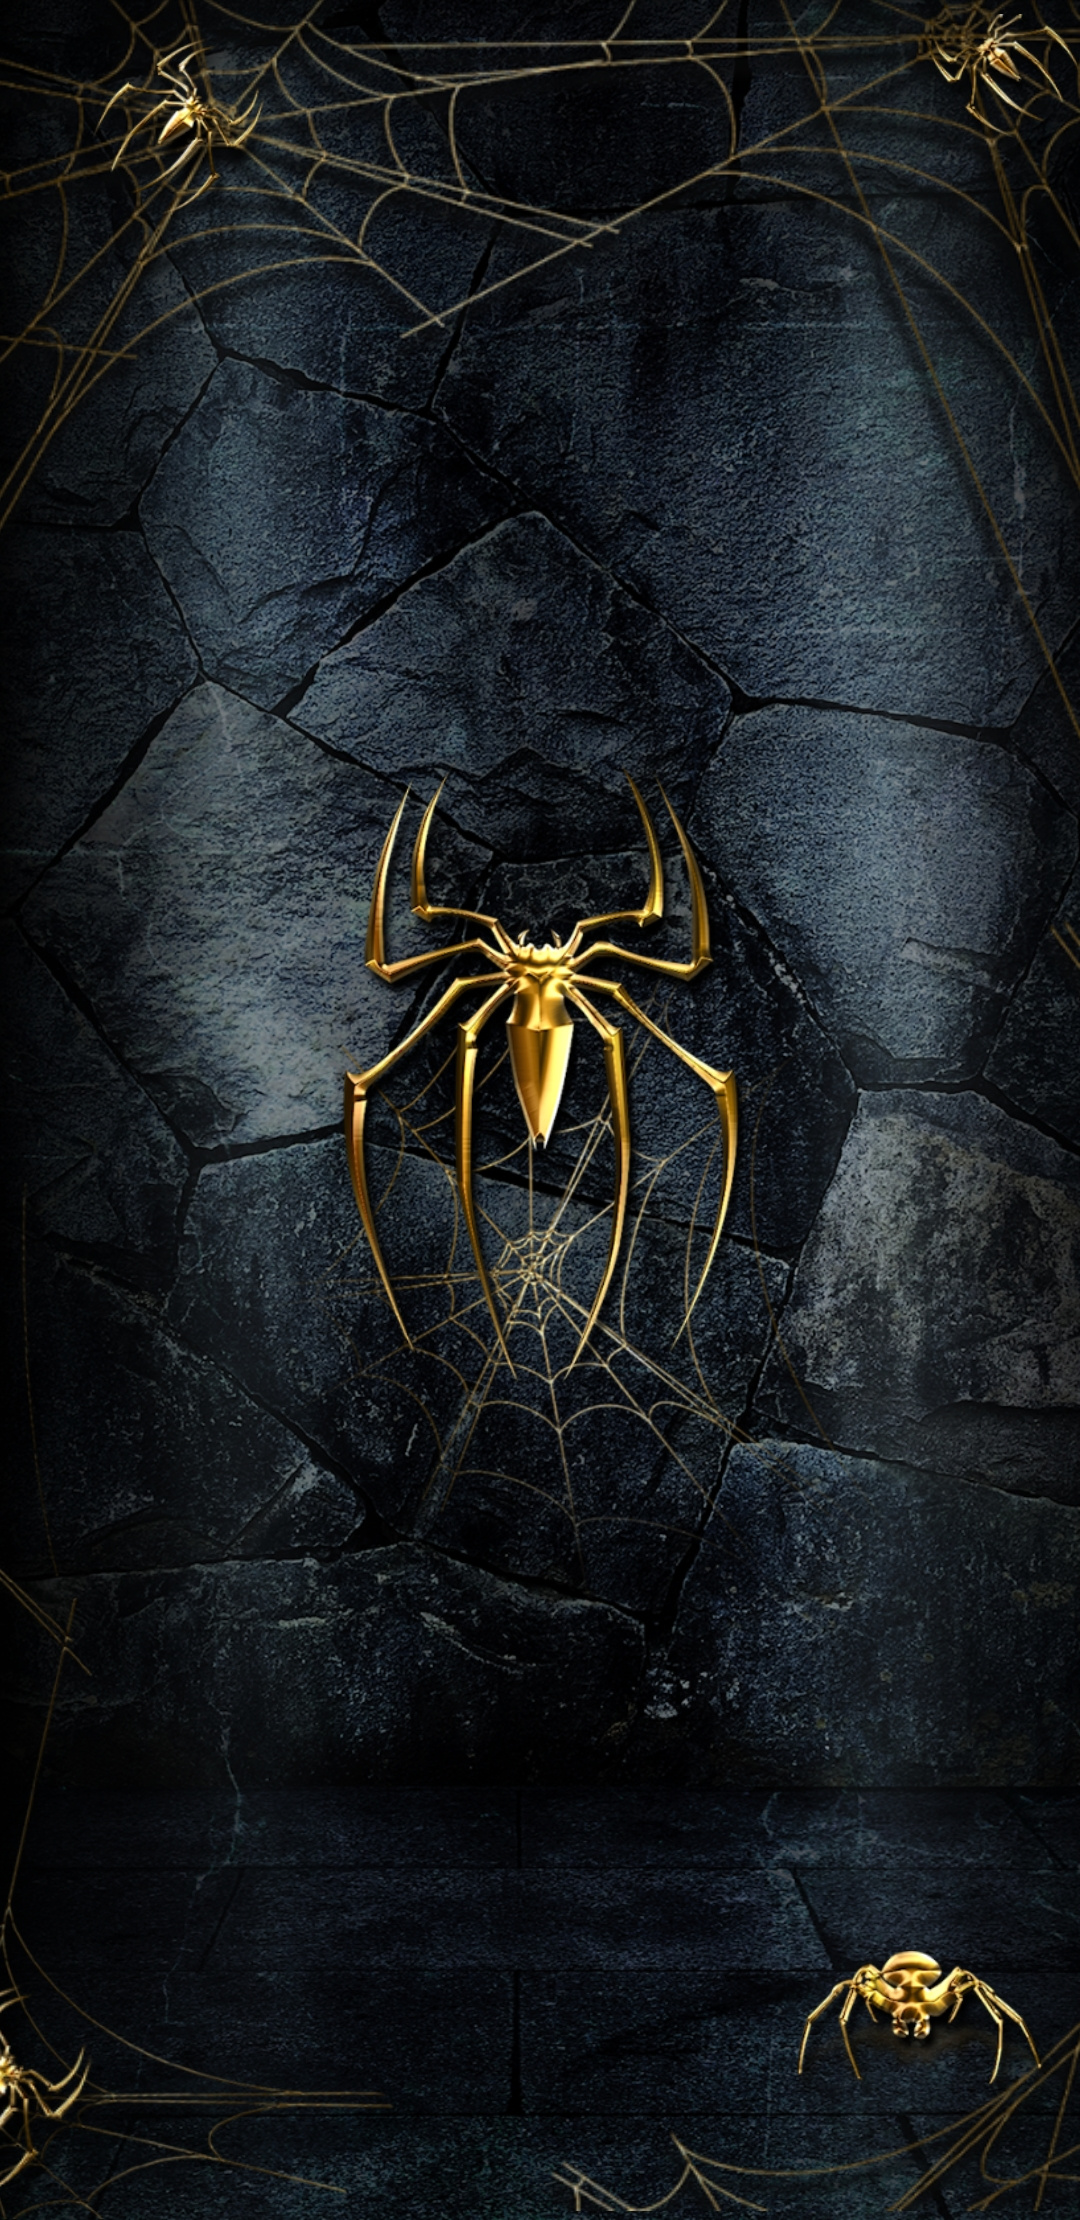 Spider - Spider Wallpaper Hd For Mobile - HD Wallpaper 